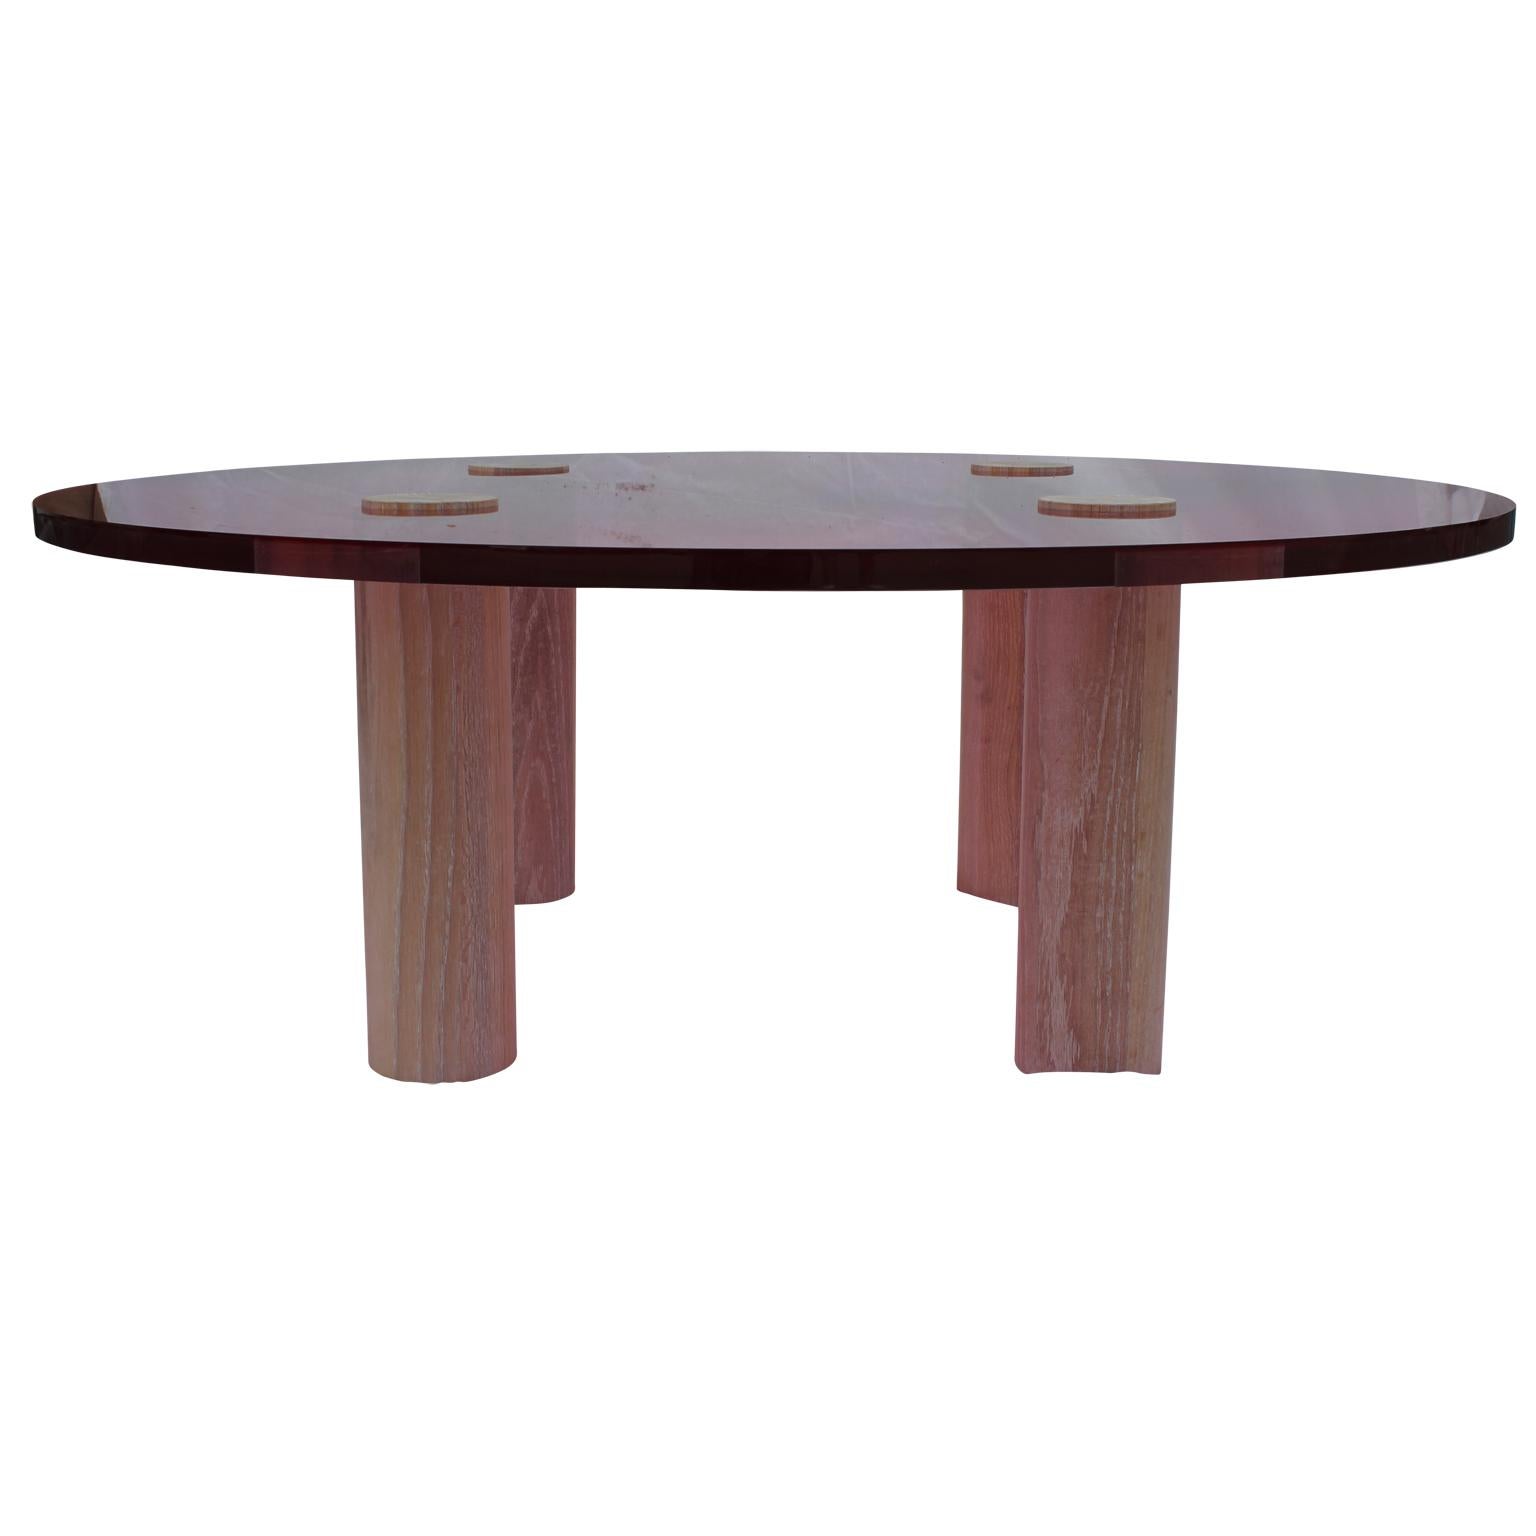 Reeves Art and Design custom made pink or rose Lucite table in a bold modern style. The table has four white oak legs with a white cerused finish. This table can be made in clear Lucite as well.